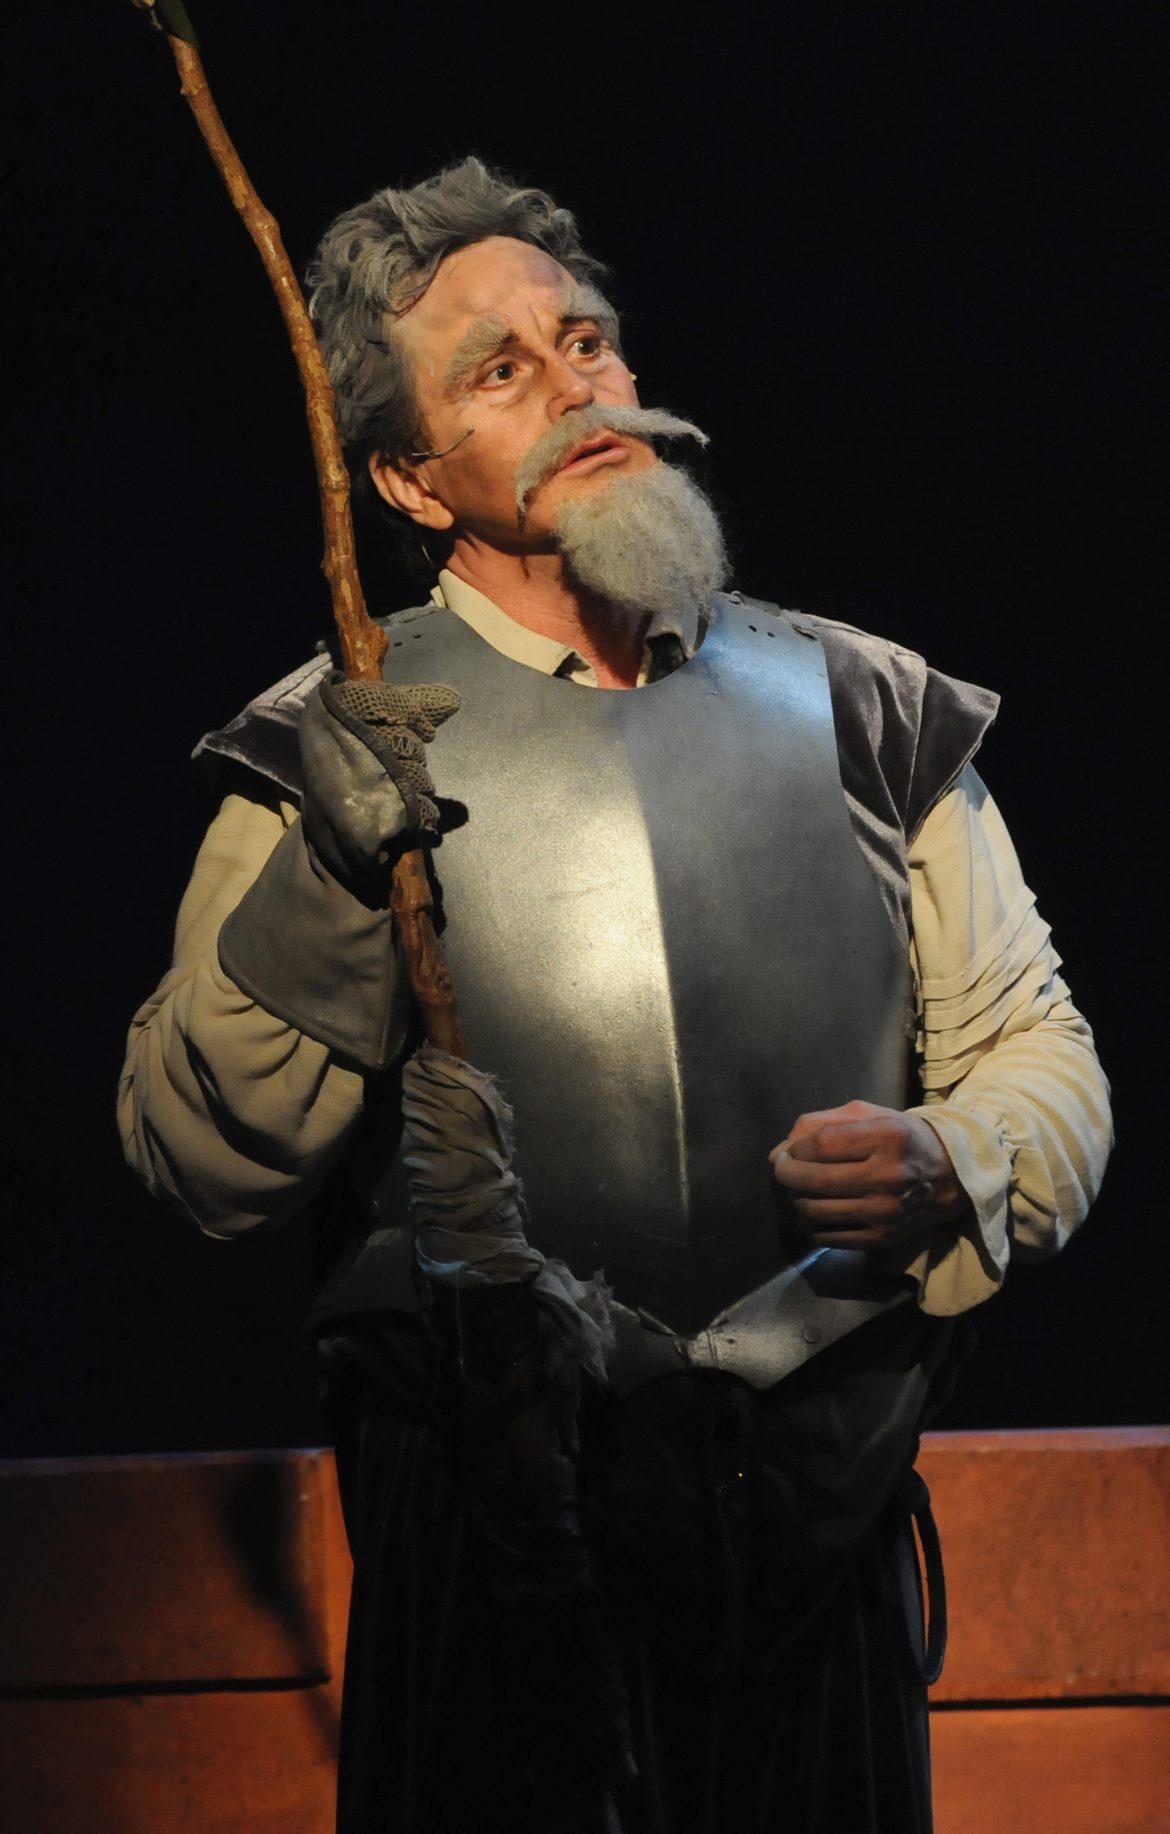 Man wears armor along with some fake facial hair to play Don Quixote